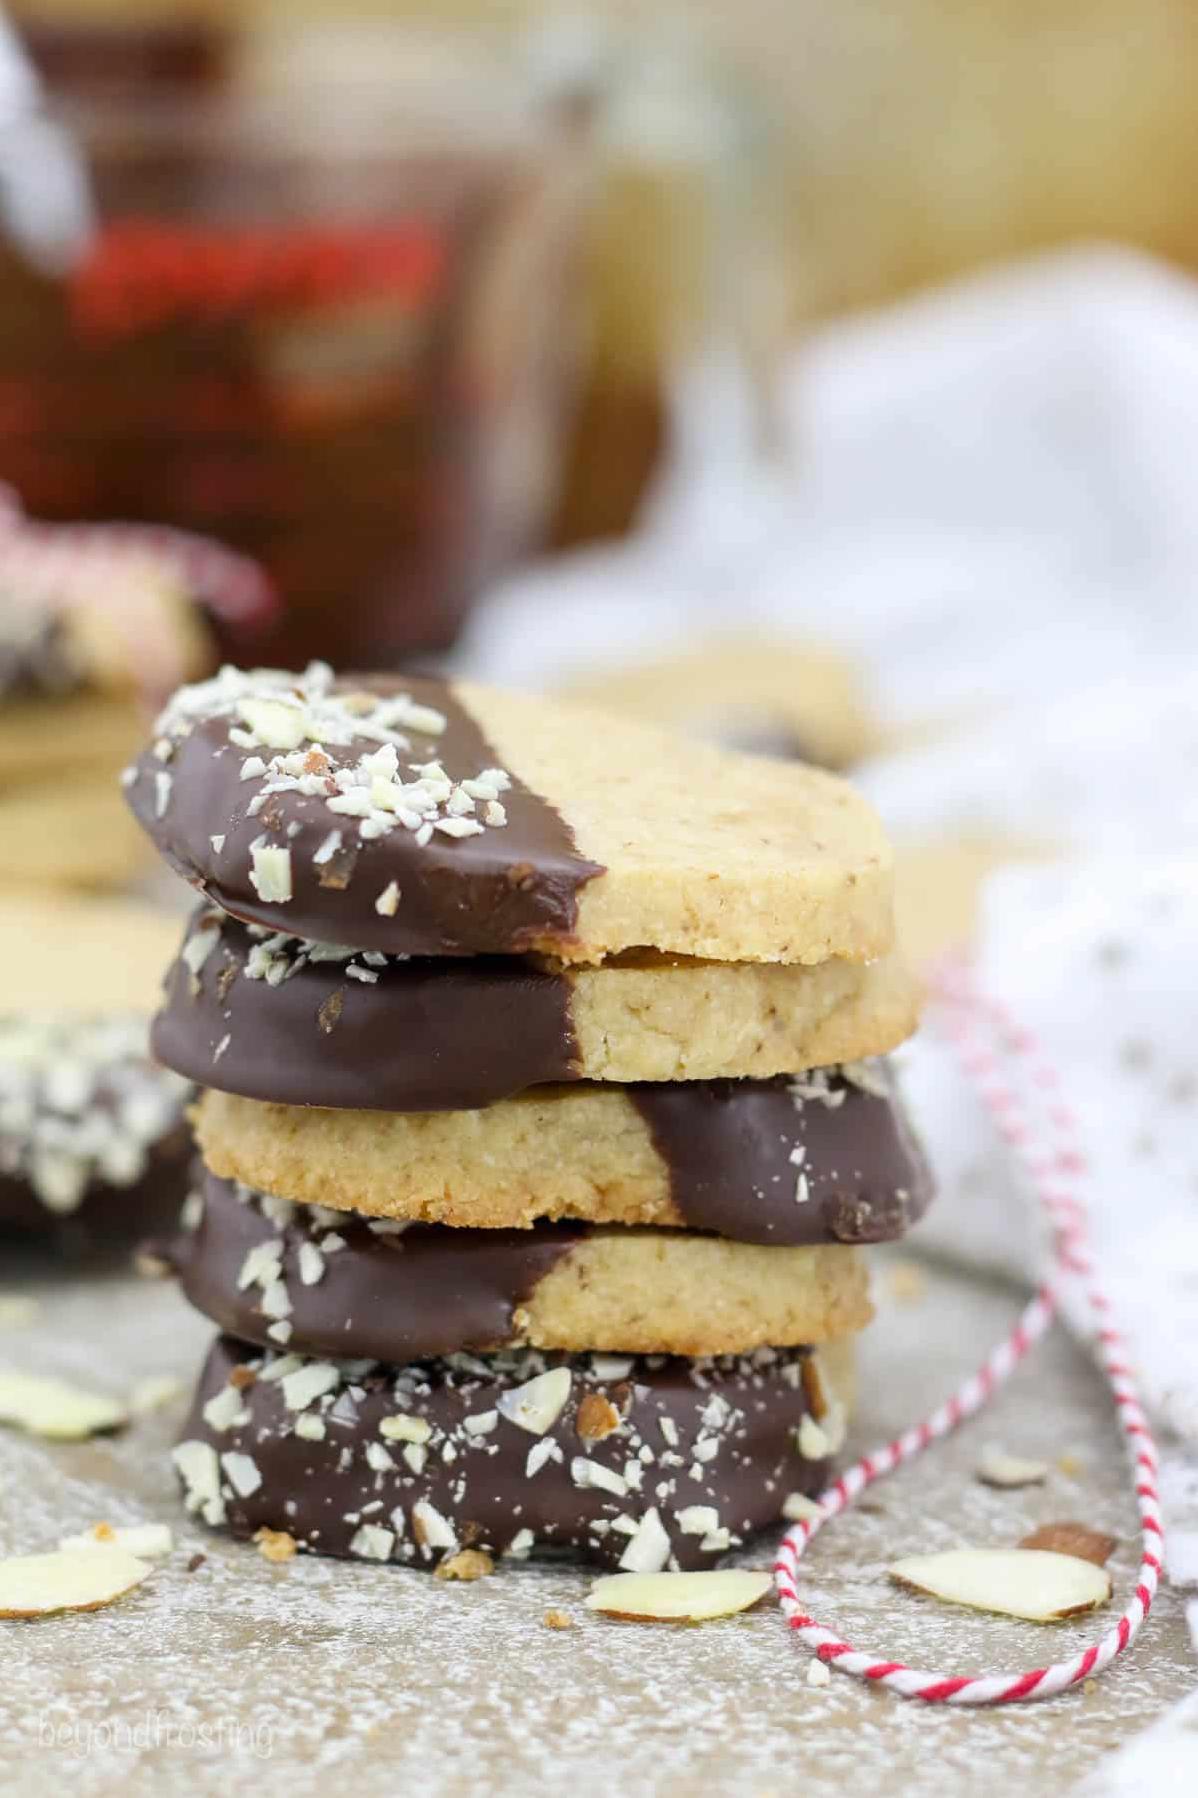  Savor every bite of these gourmet cookies that have a perfect balance of sweetness and bitterness.